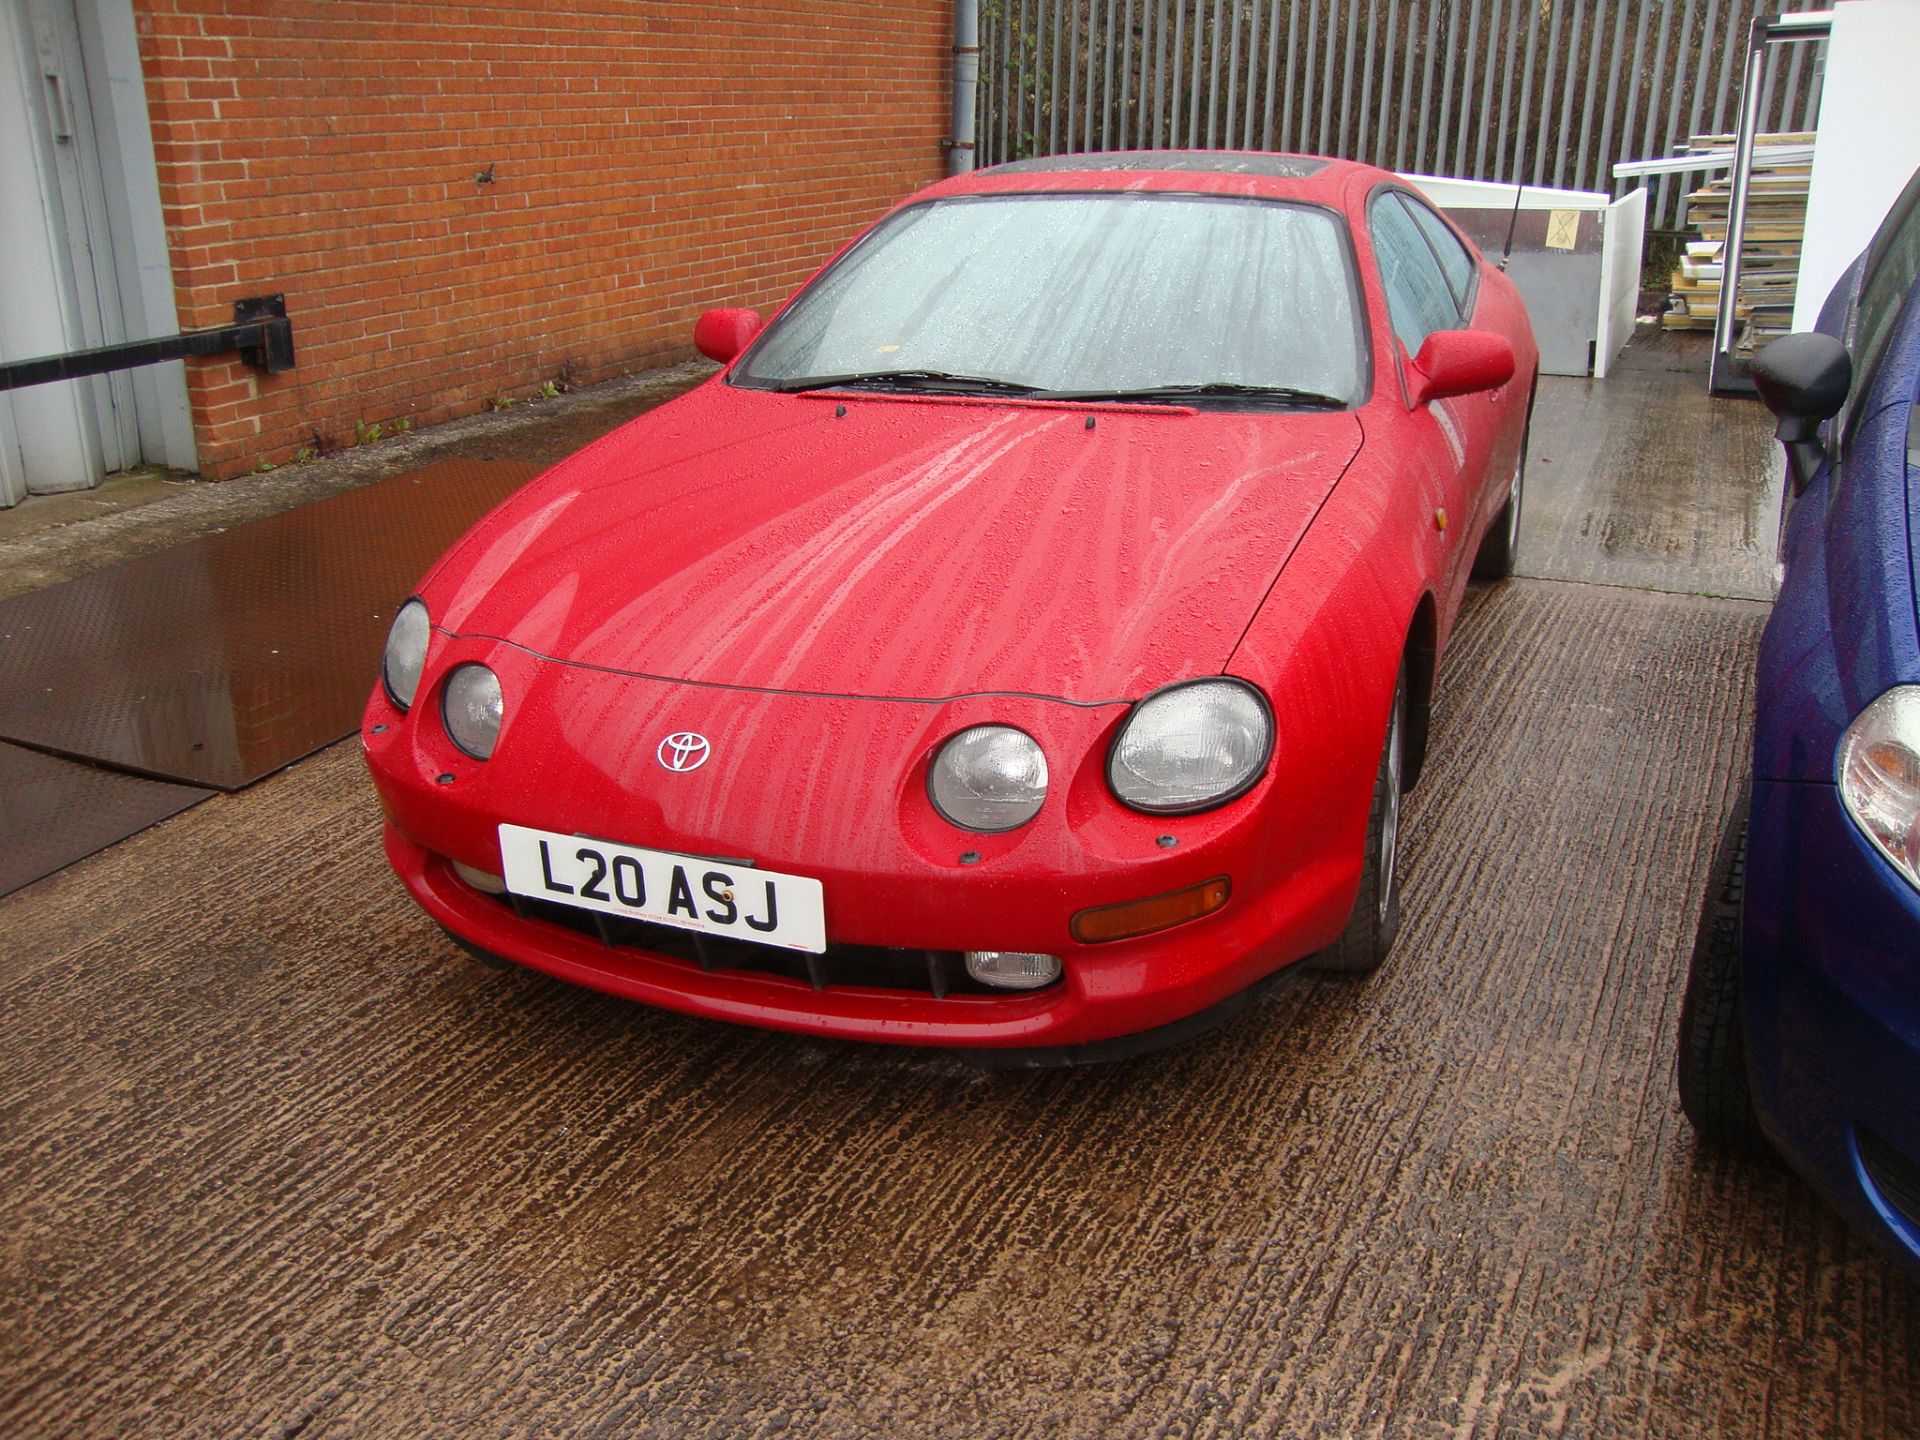 1994 Toyota Celica GT Coupe - Image 2 of 16